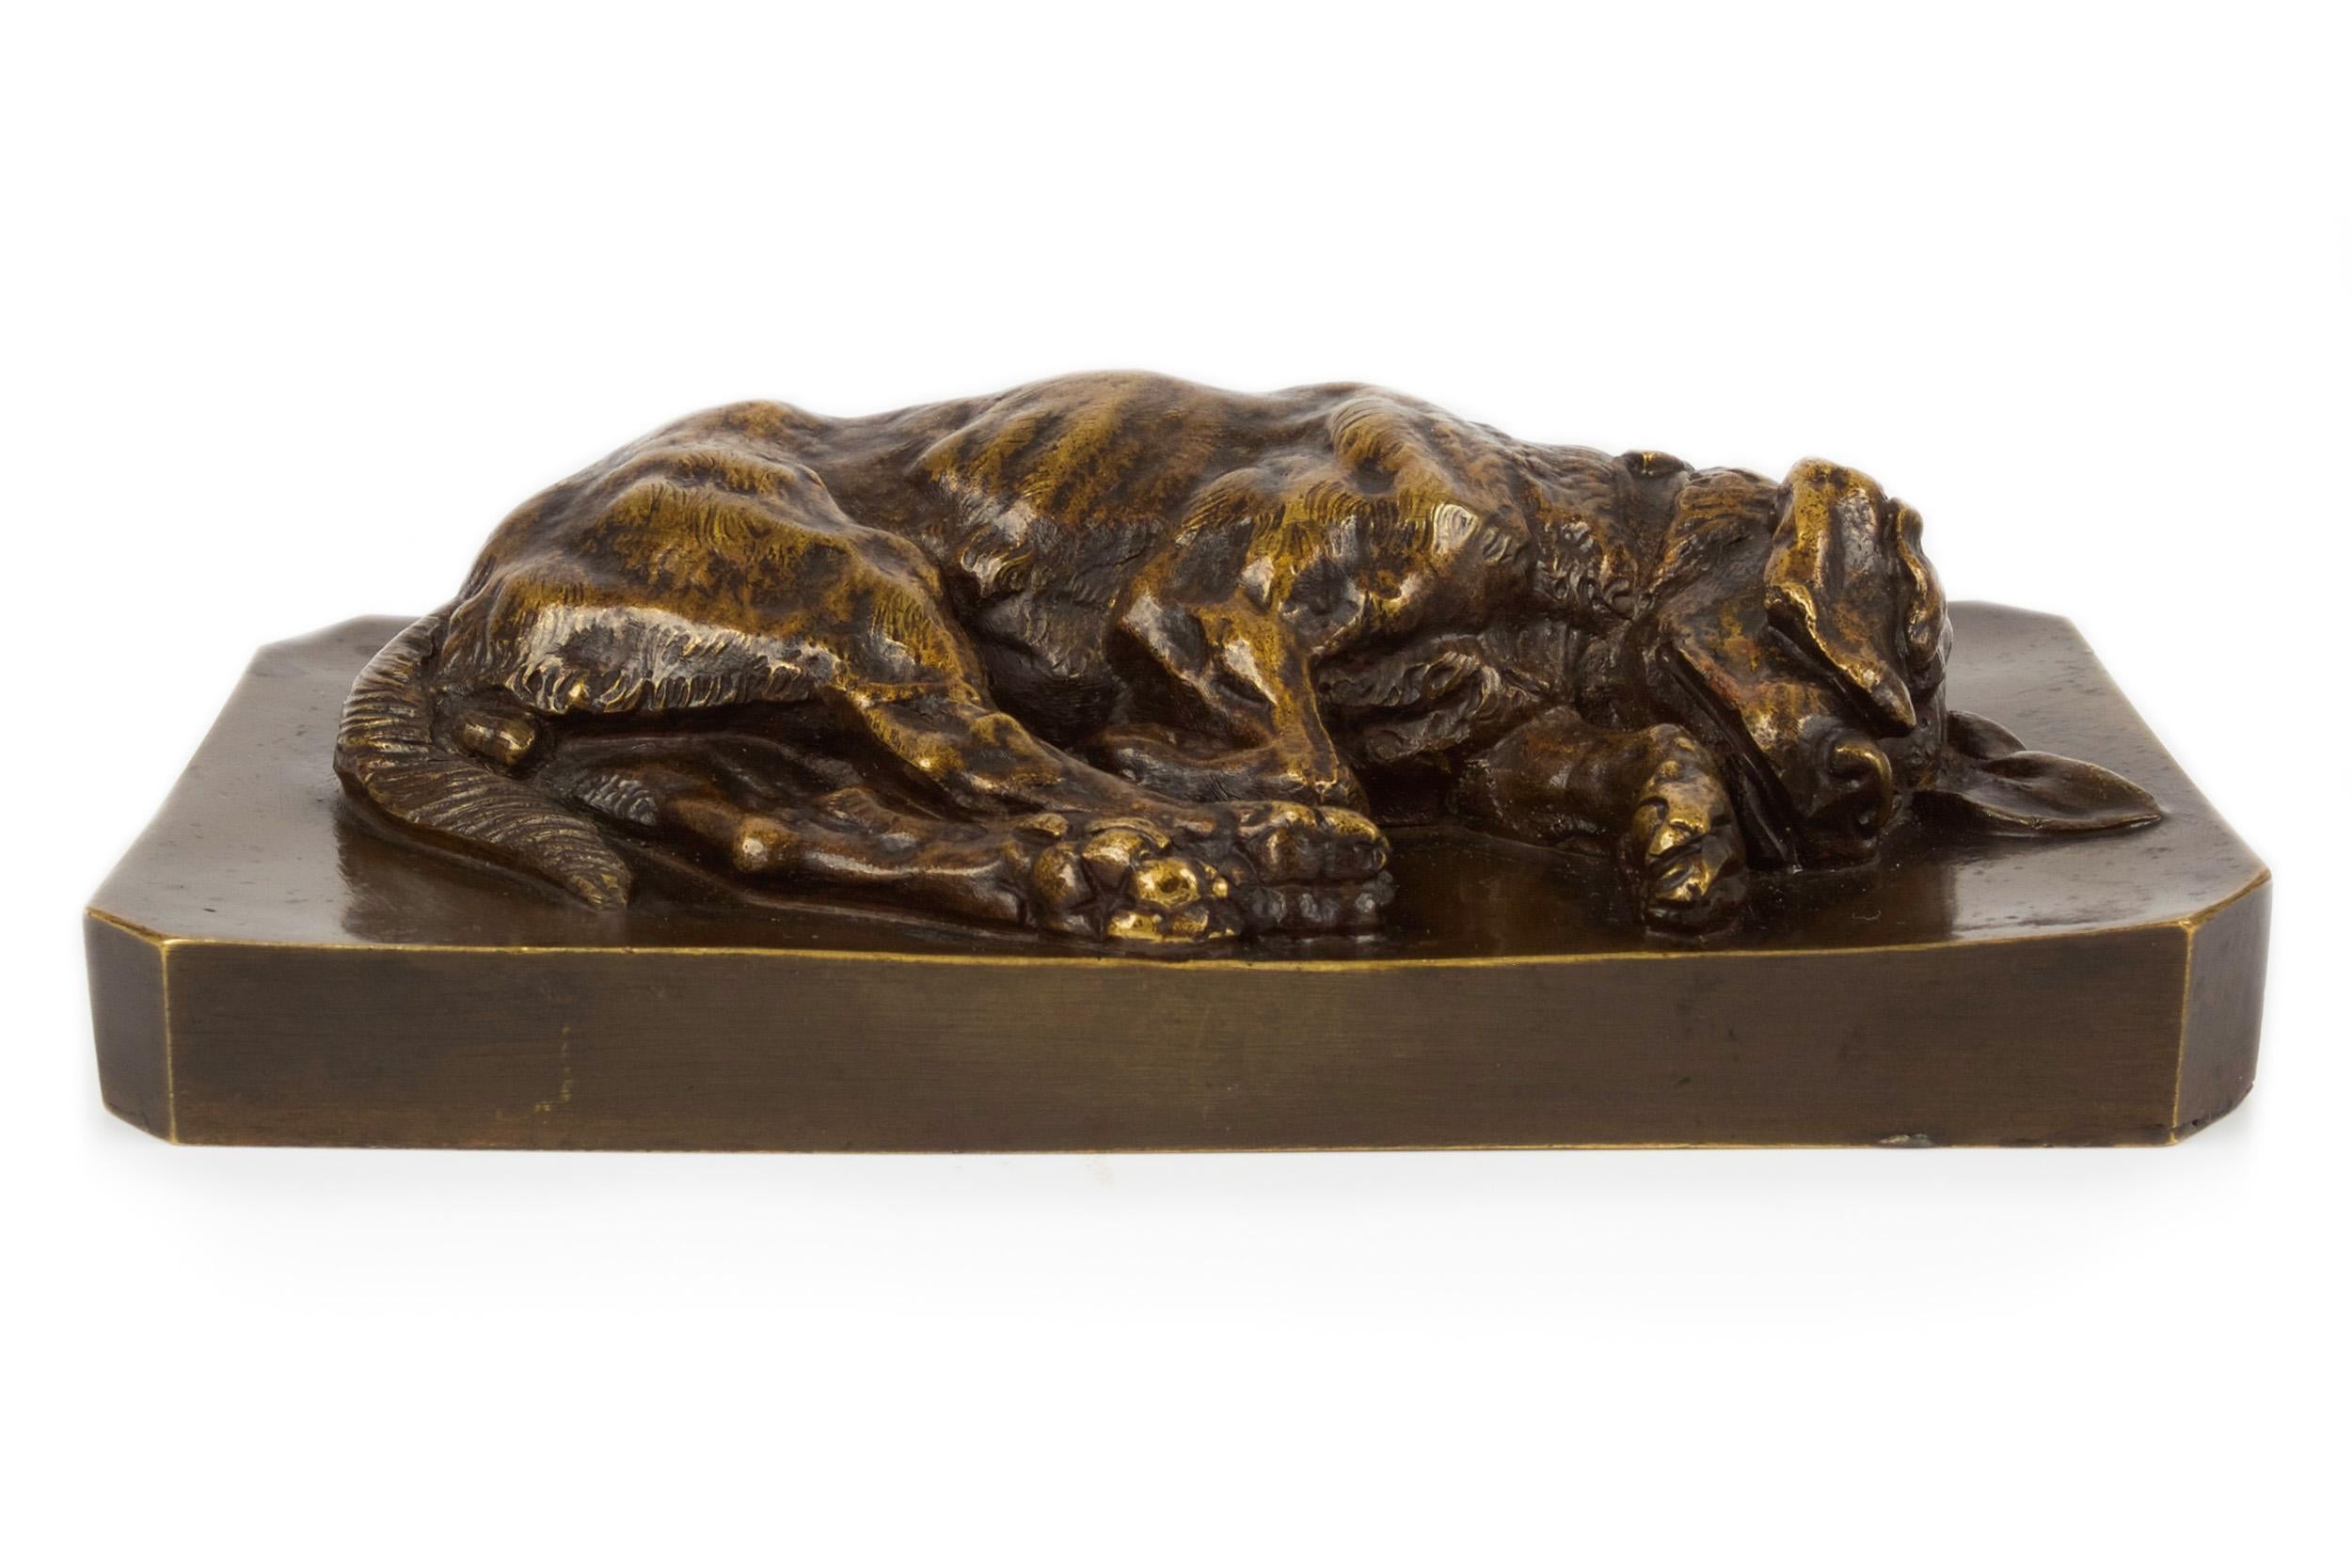 A fine sand-cast model of a sleeping basset hound by animal painter and sculptor Jean-Baptiste-Louis Guy, it exhibits an overall medium brown surface patina with a complex variety of hues and intensity ranging from nearly black in recesses to nearly